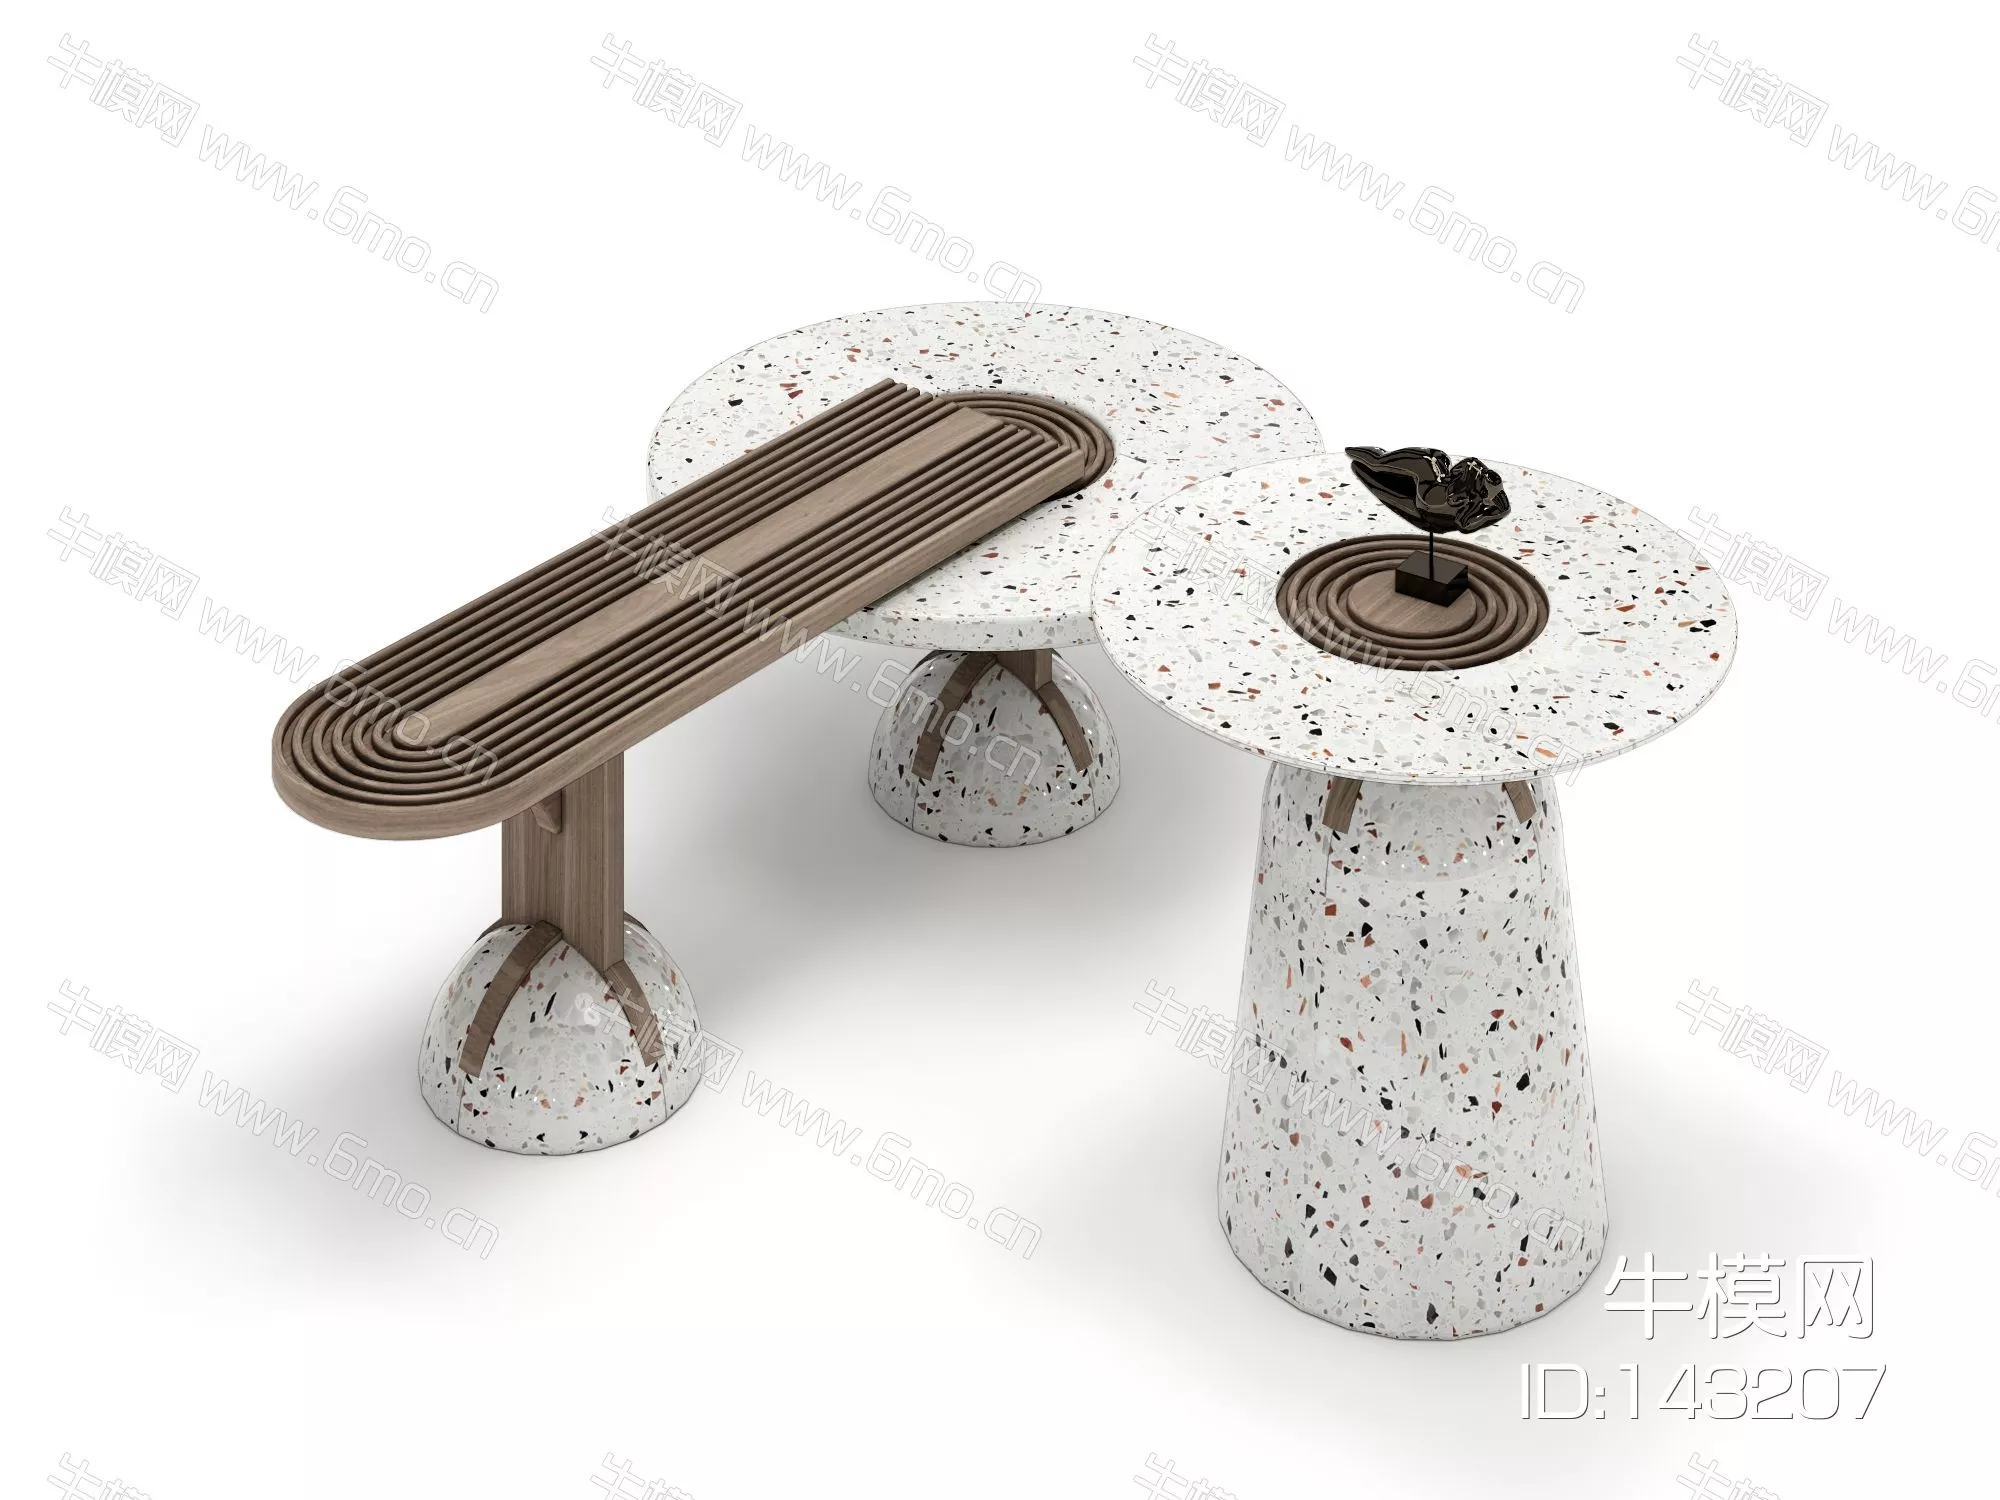 MODERN COFFEE TABLE - SKETCHUP 3D MODEL - ENSCAPE - 143207